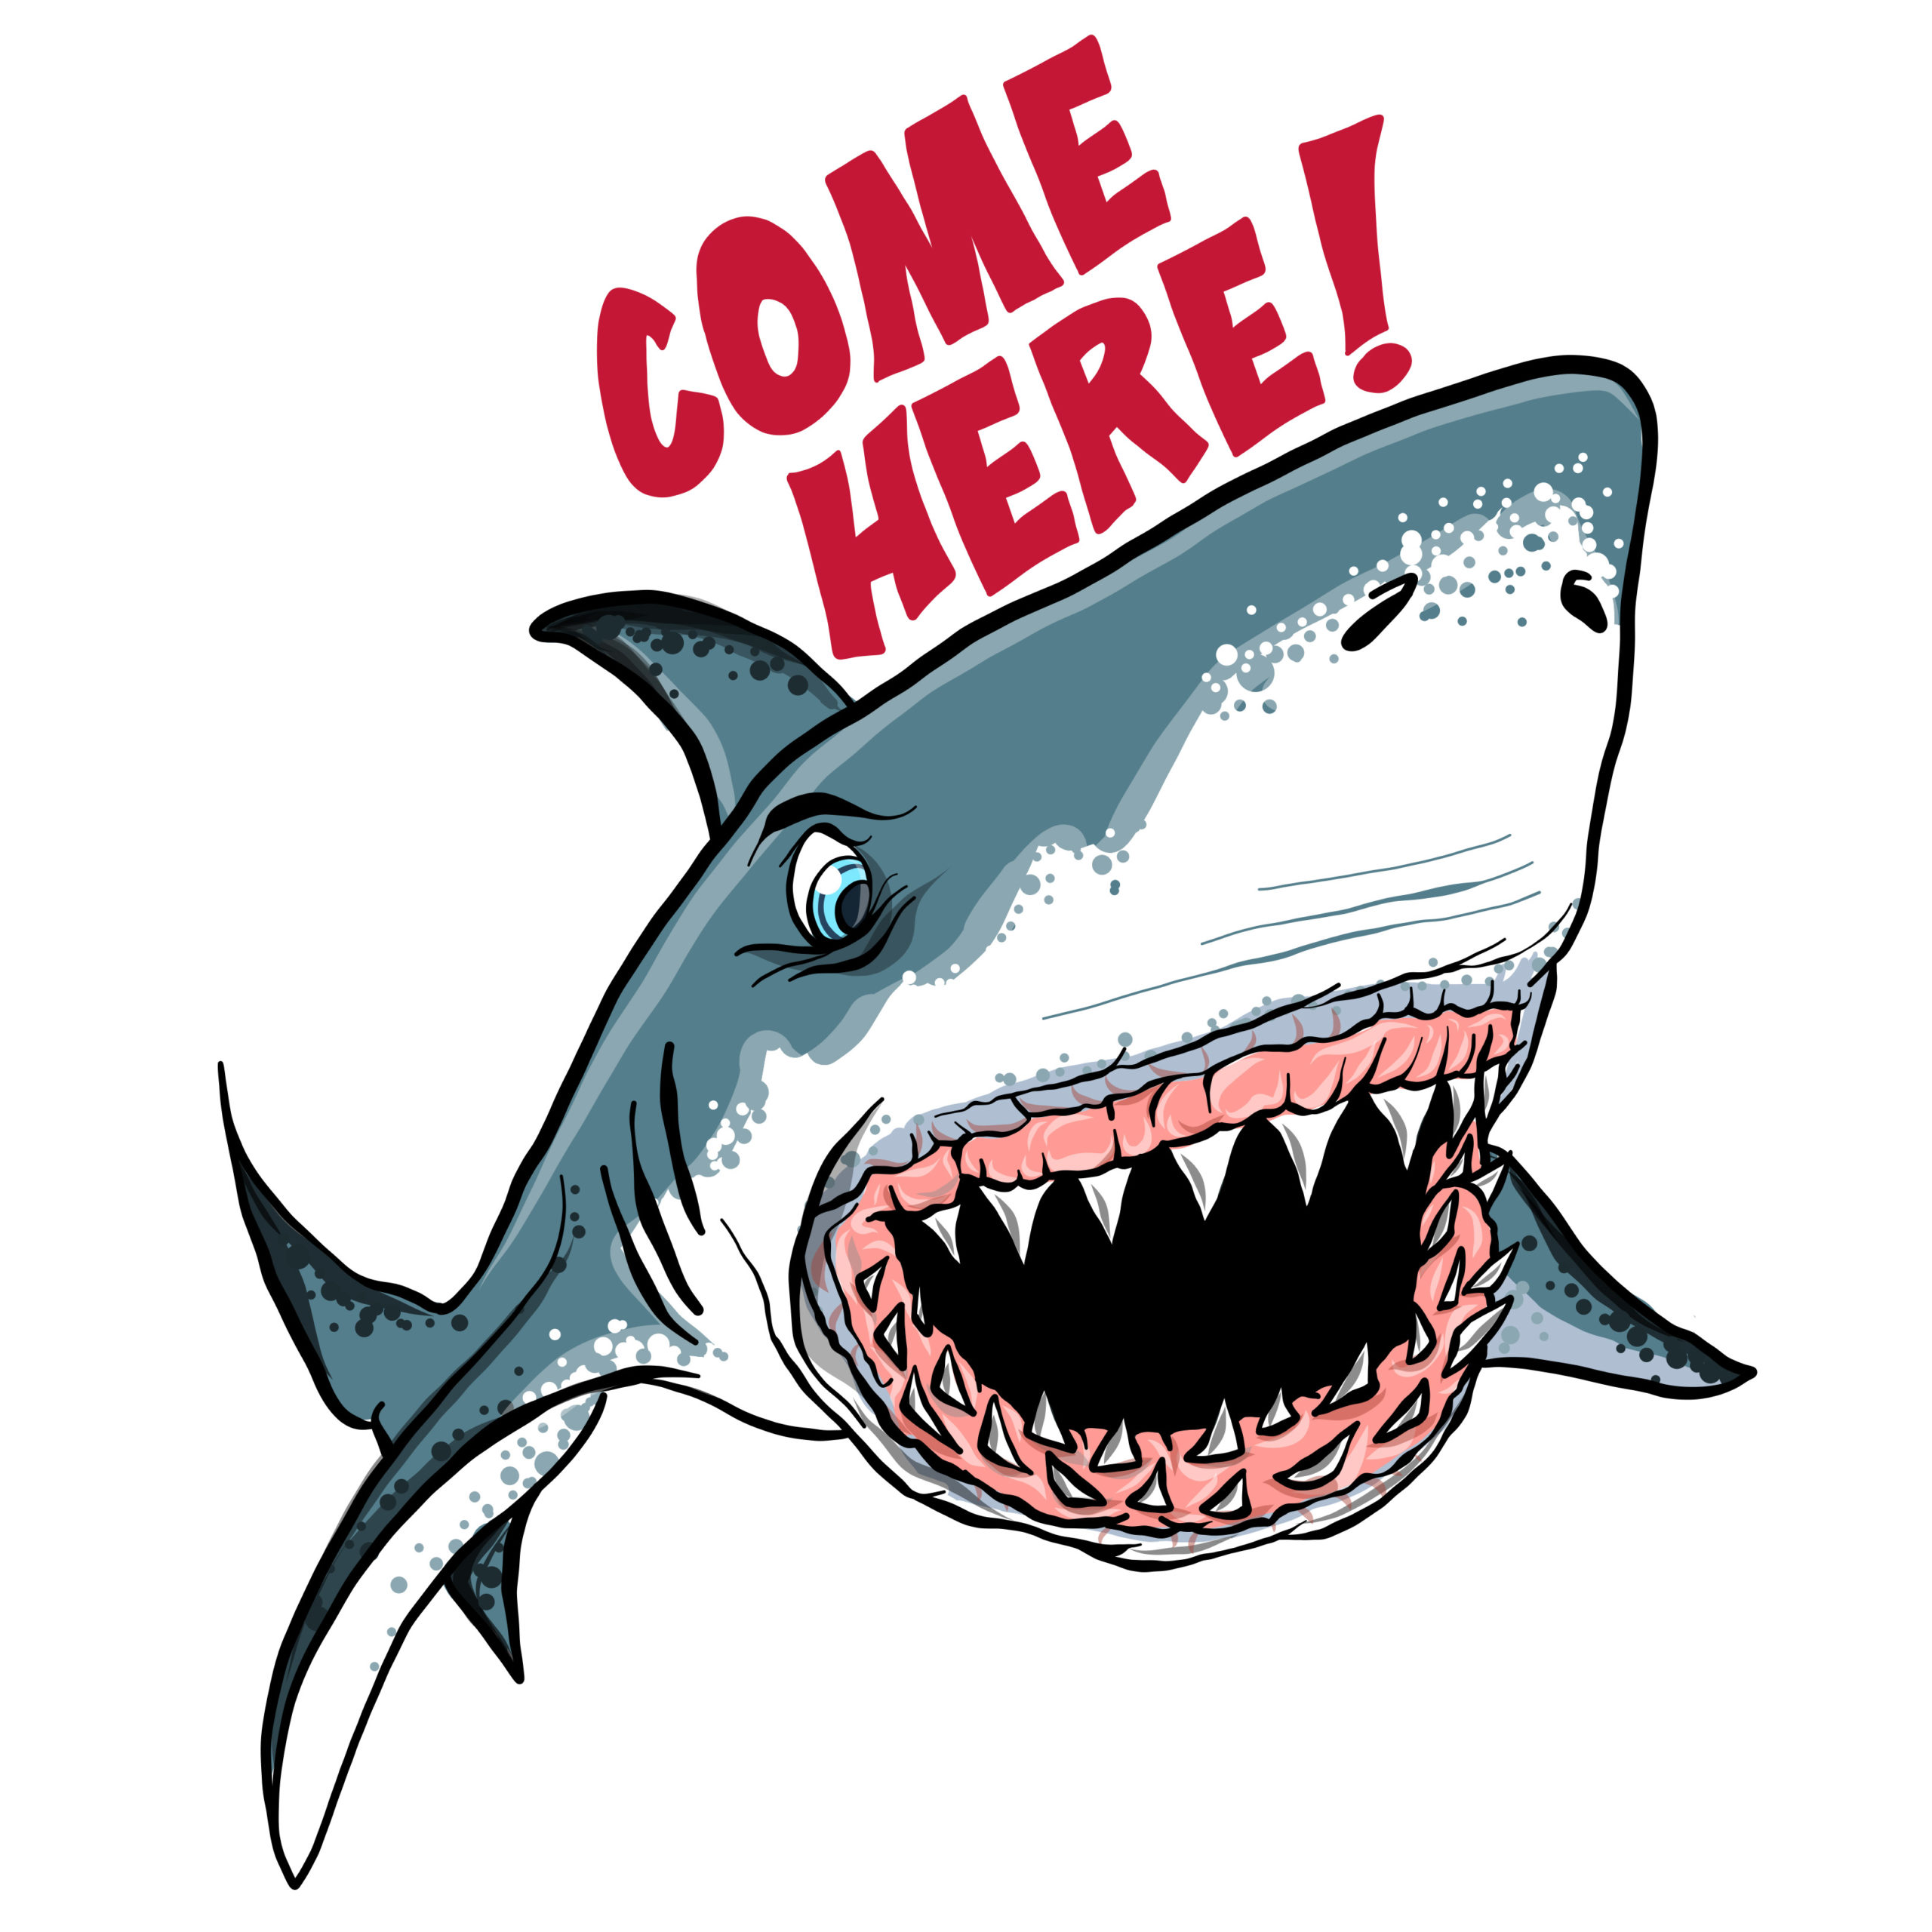 Shark - Come Here!